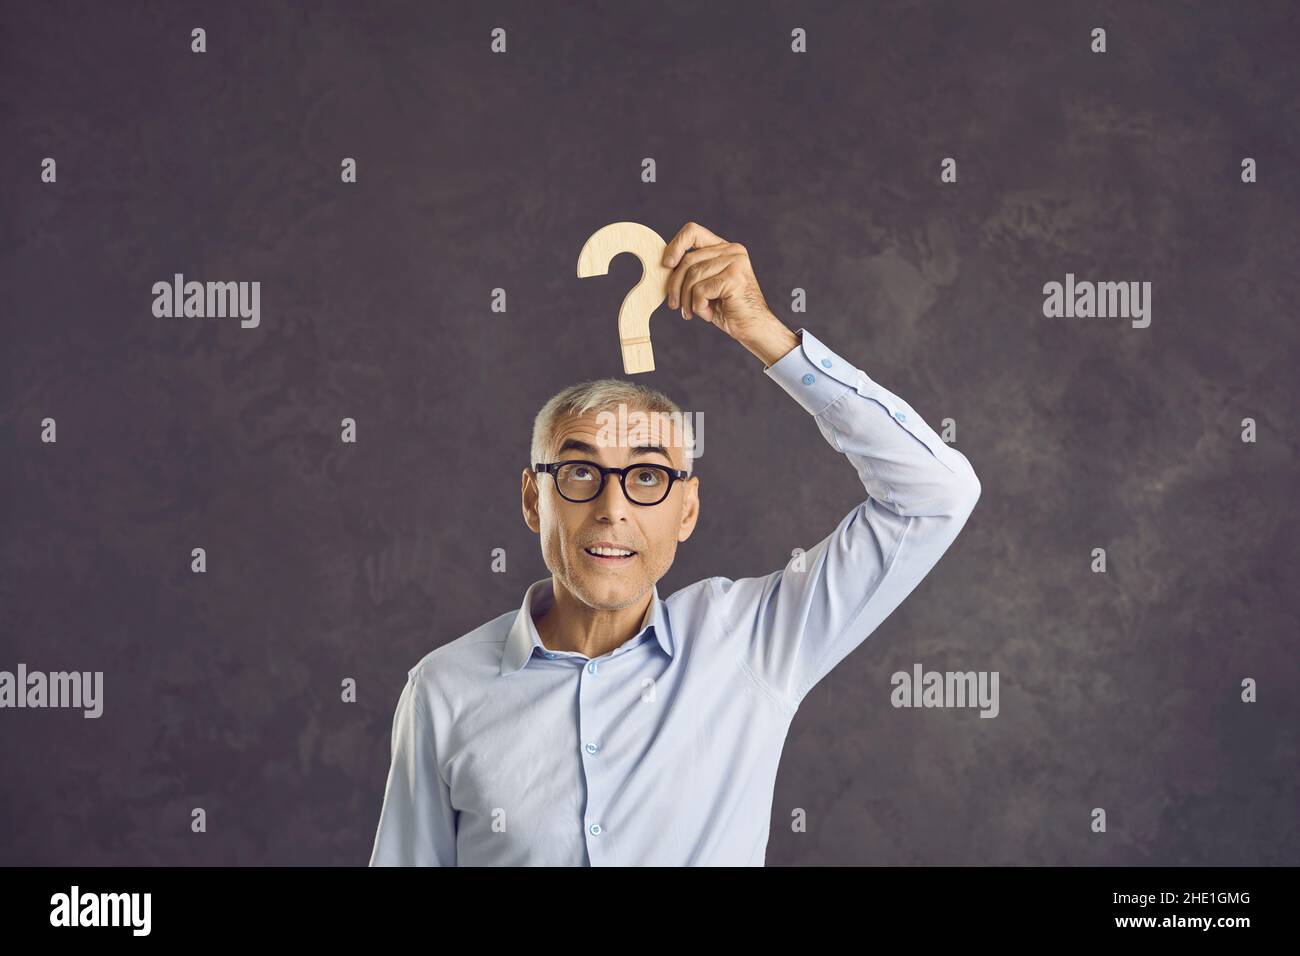 Confused senior man looking at a question mark and thinking of an answer to the question Stock Photo